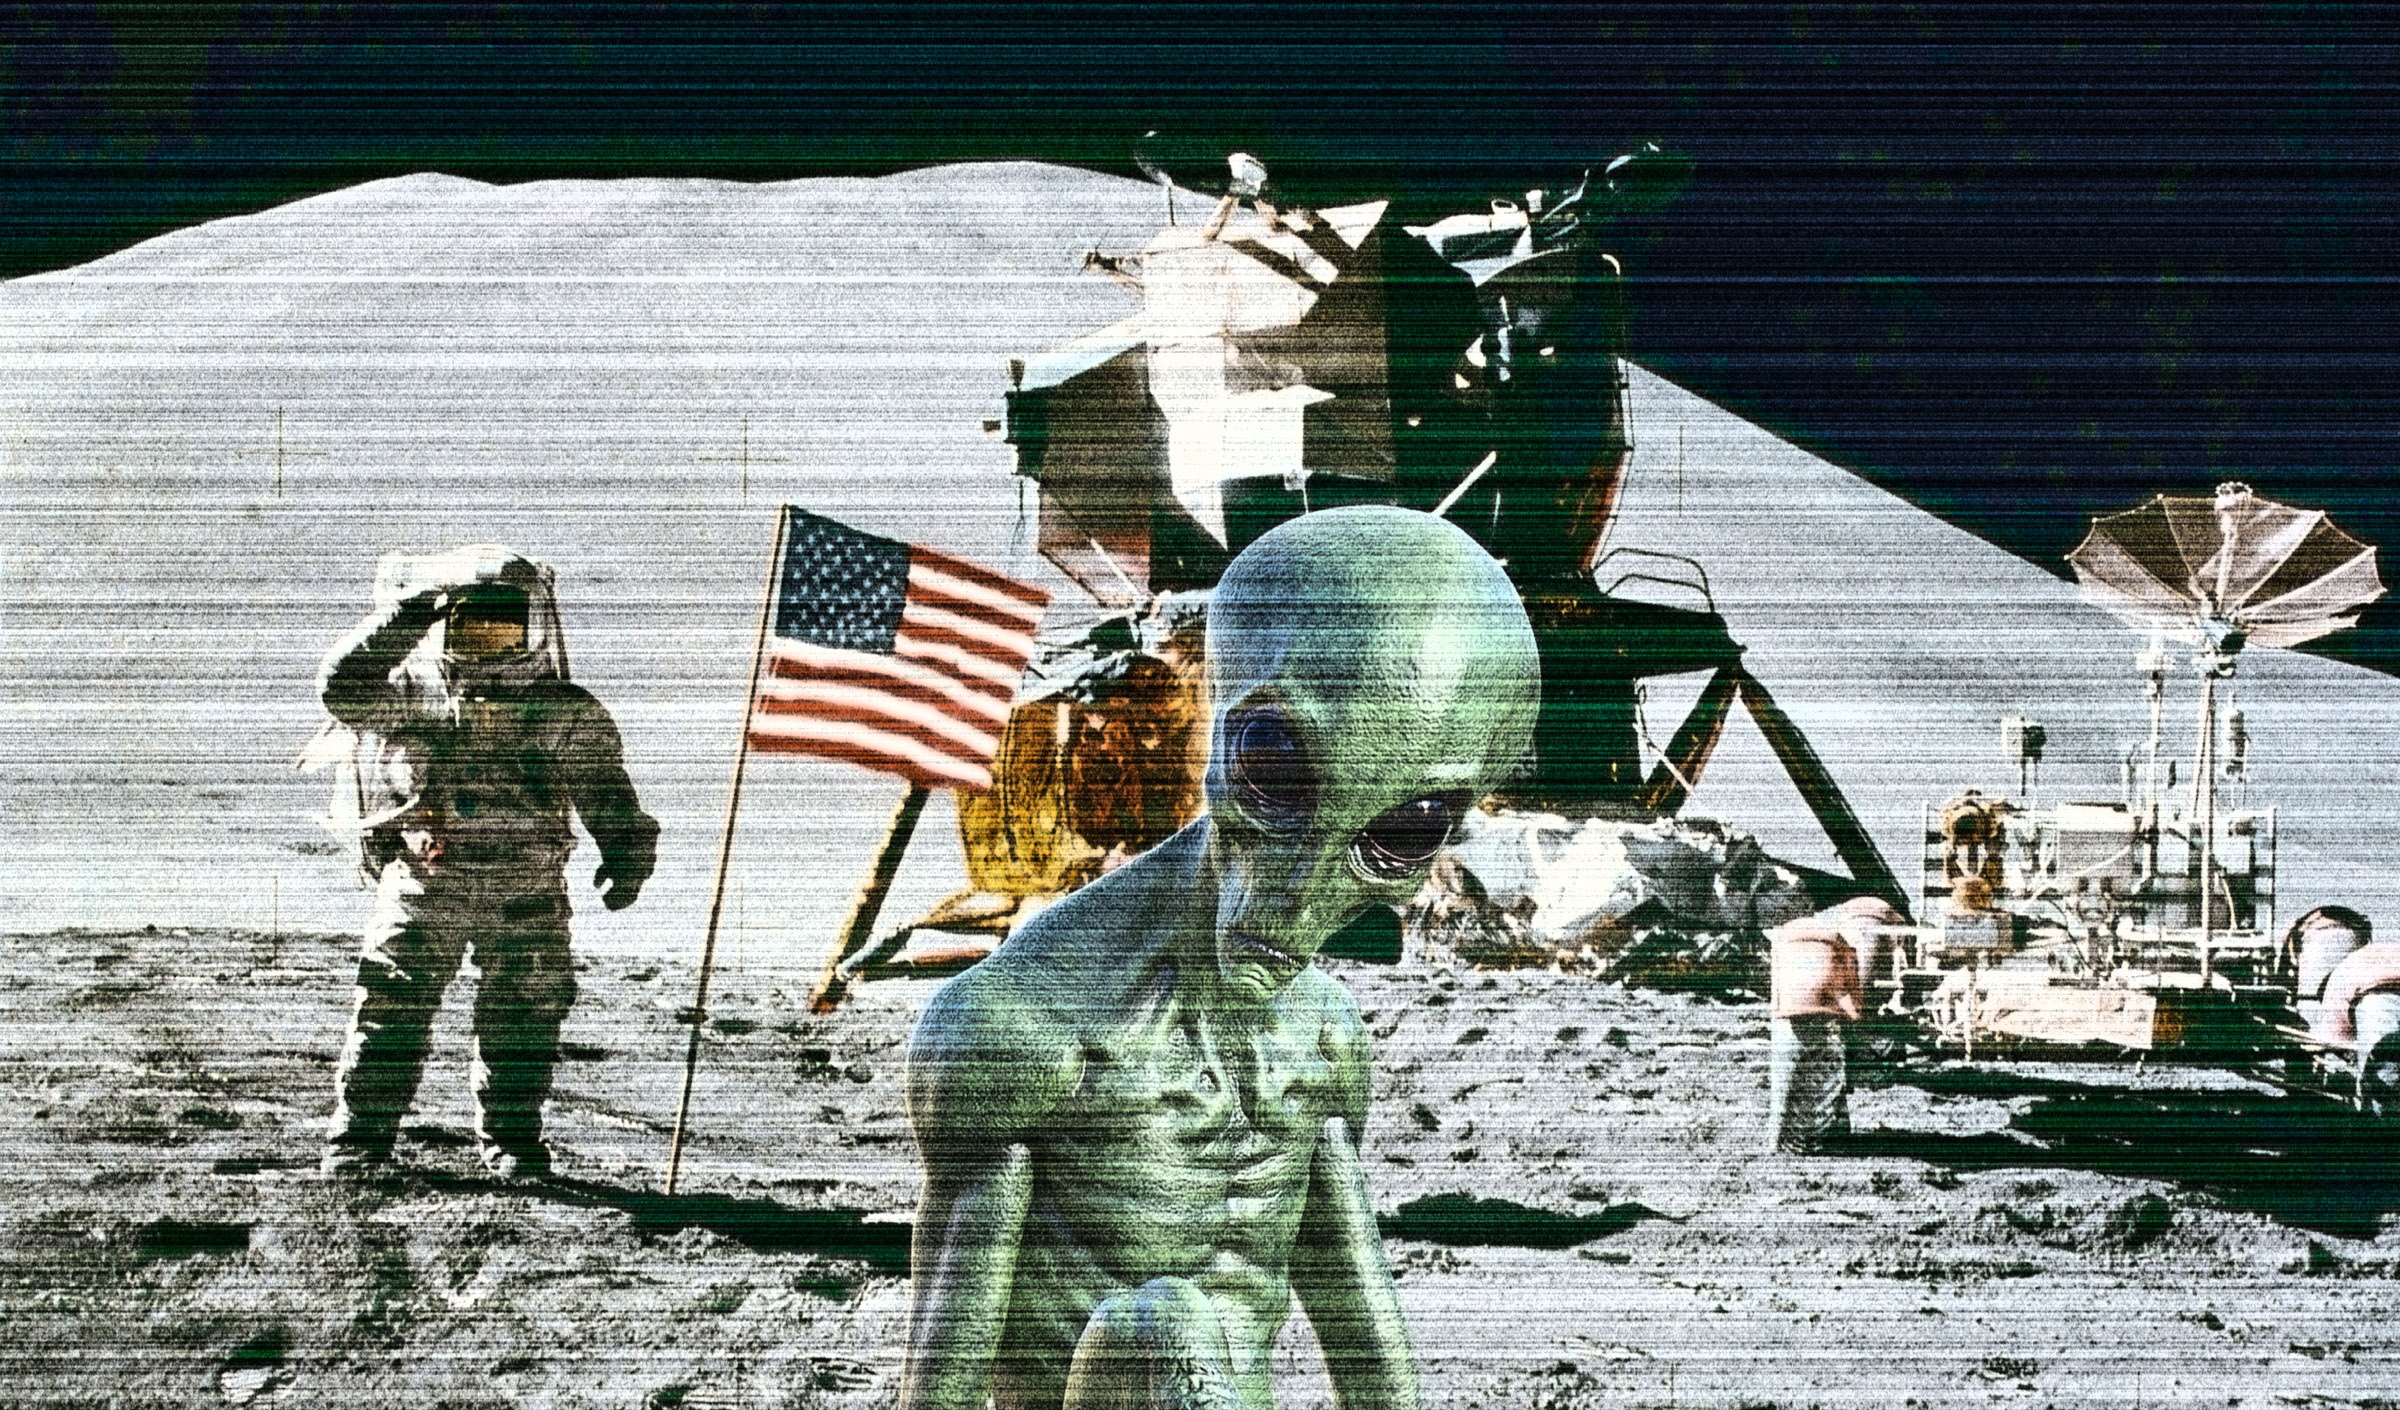 Anomalies Spotted On The Moon Are 'Undeniable Proof' Of Alien Life